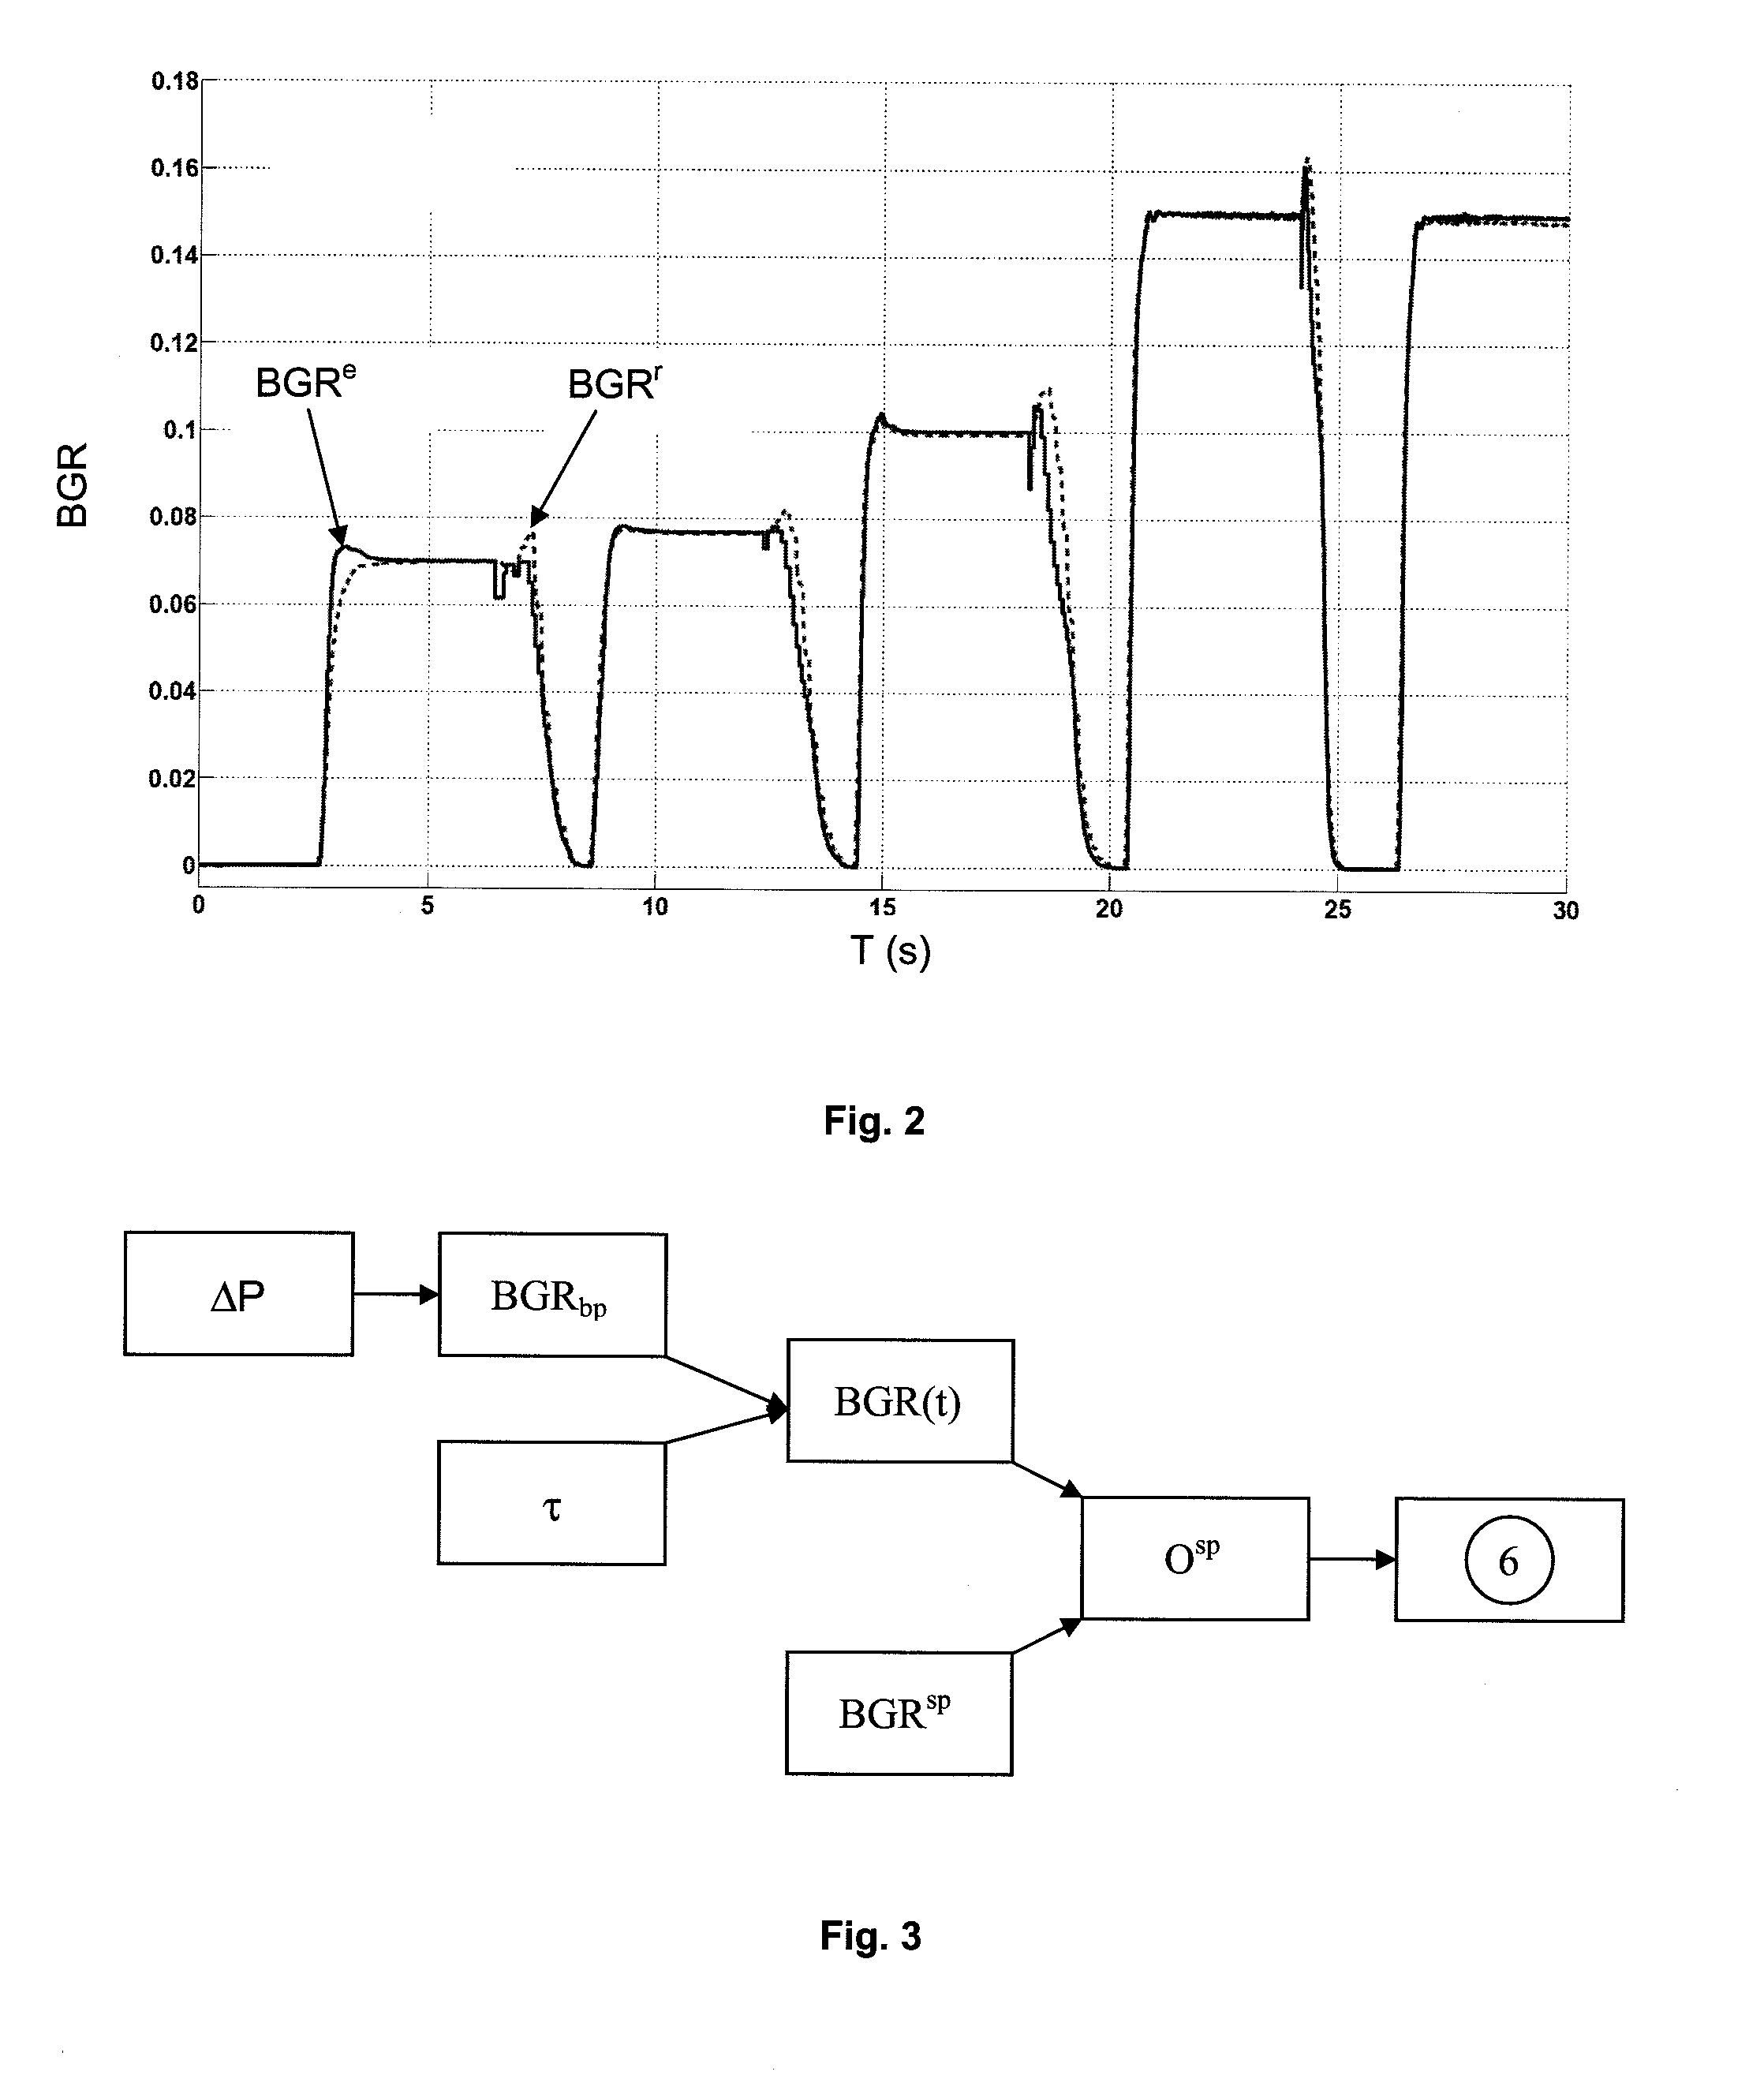 Method of controlling a combustion engine from estimation of the burnt gas mass fraction in the intake manifold